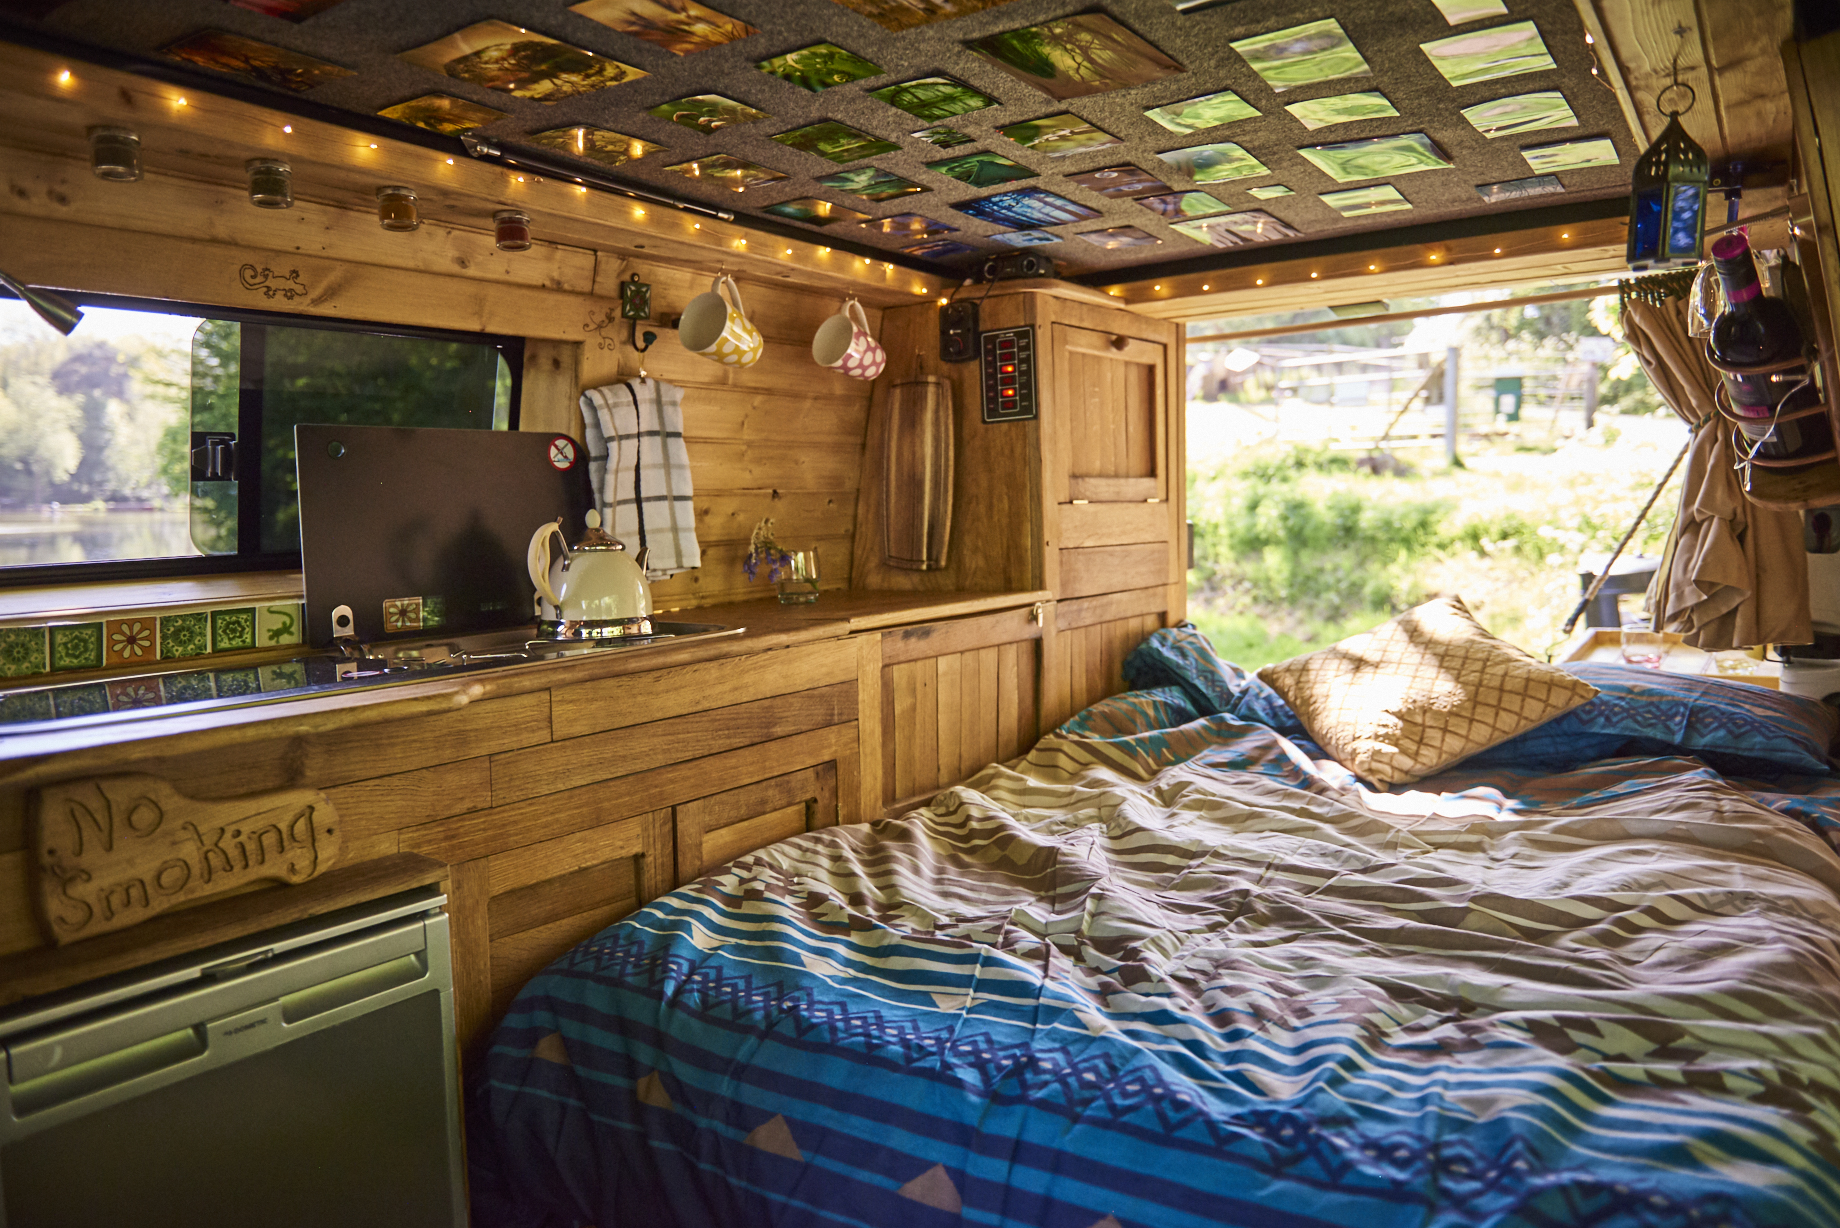 Interior of a cozy, wooden camper van. The bed, covered with a blue and white patterned blanket, is adjacent to a kitchenette with a small stove, teapot, and various utensils. The ceiling is decorated with colorful tiles. The window above the bed reveals a scenic, sunlit view of trees and grass.